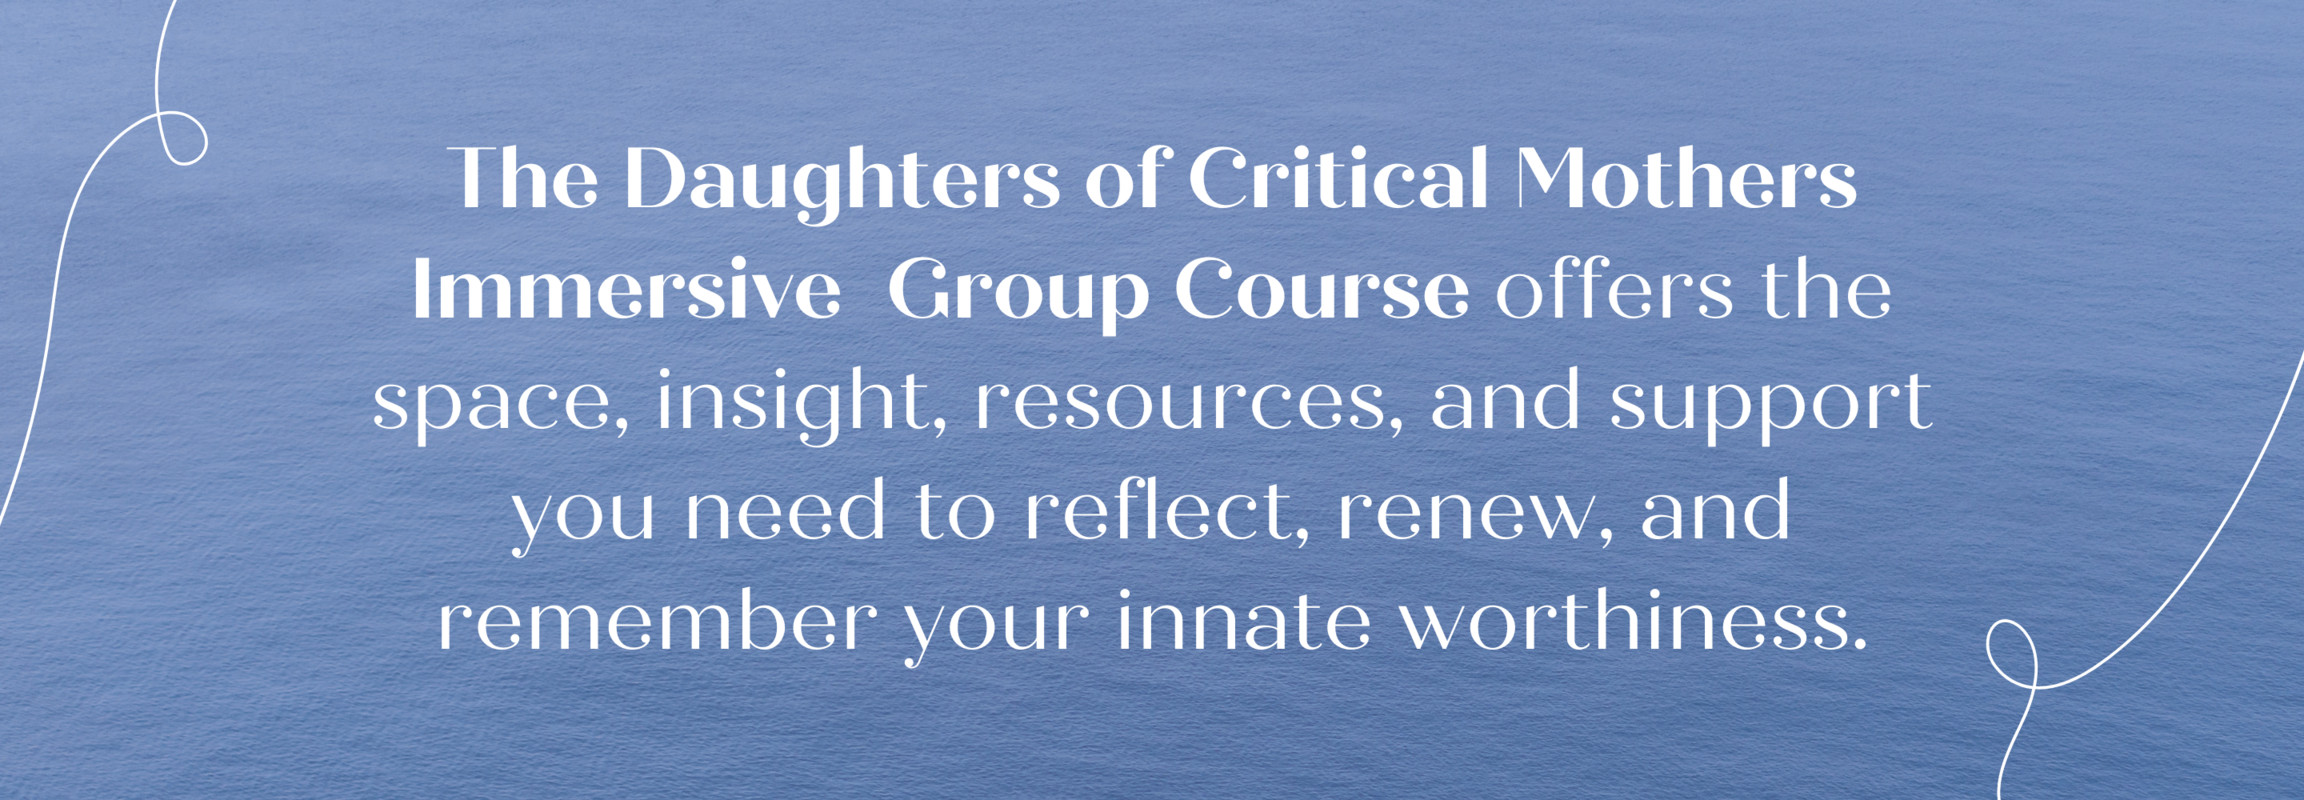 The Daughters of Critical Mothers In-Depth 11 Week Group Course  offers the space, insight, resources, and support you need to reflect, renew, and remember your innate worthiness.